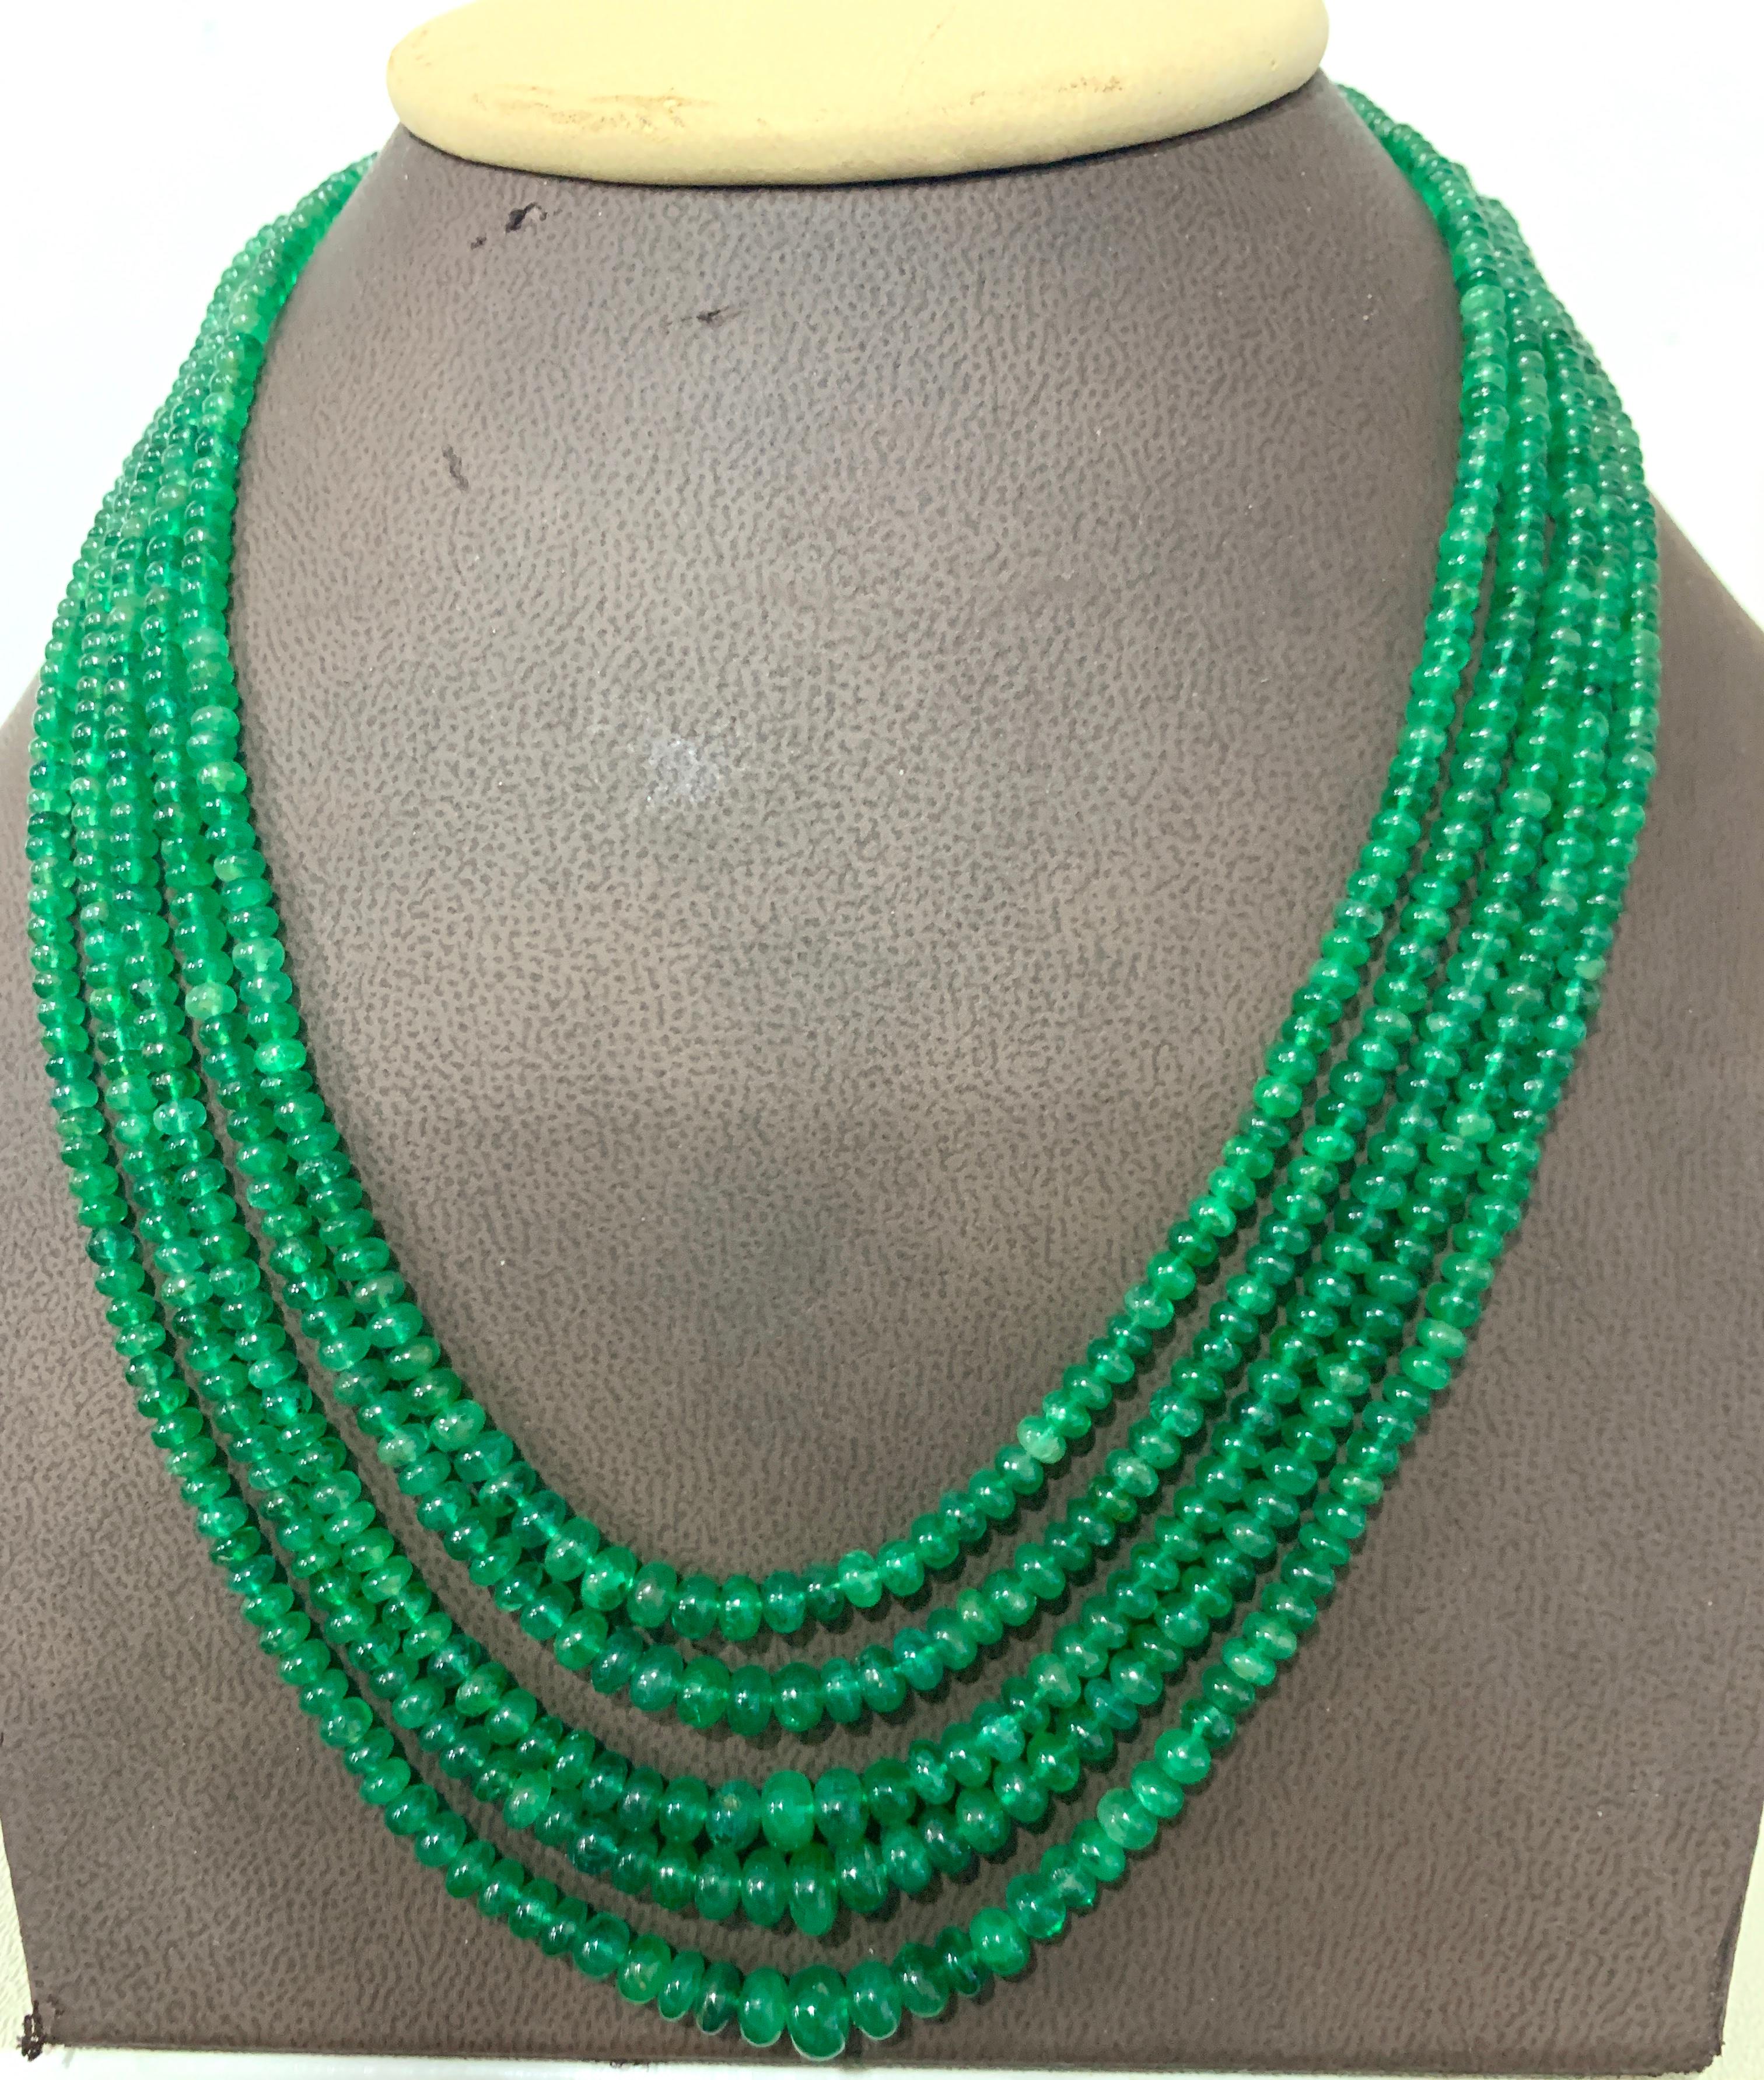 Round Cut 247 Carat 5 Layer Natural Brazilian Emerald Bead Necklace Sterling Silver Clasp